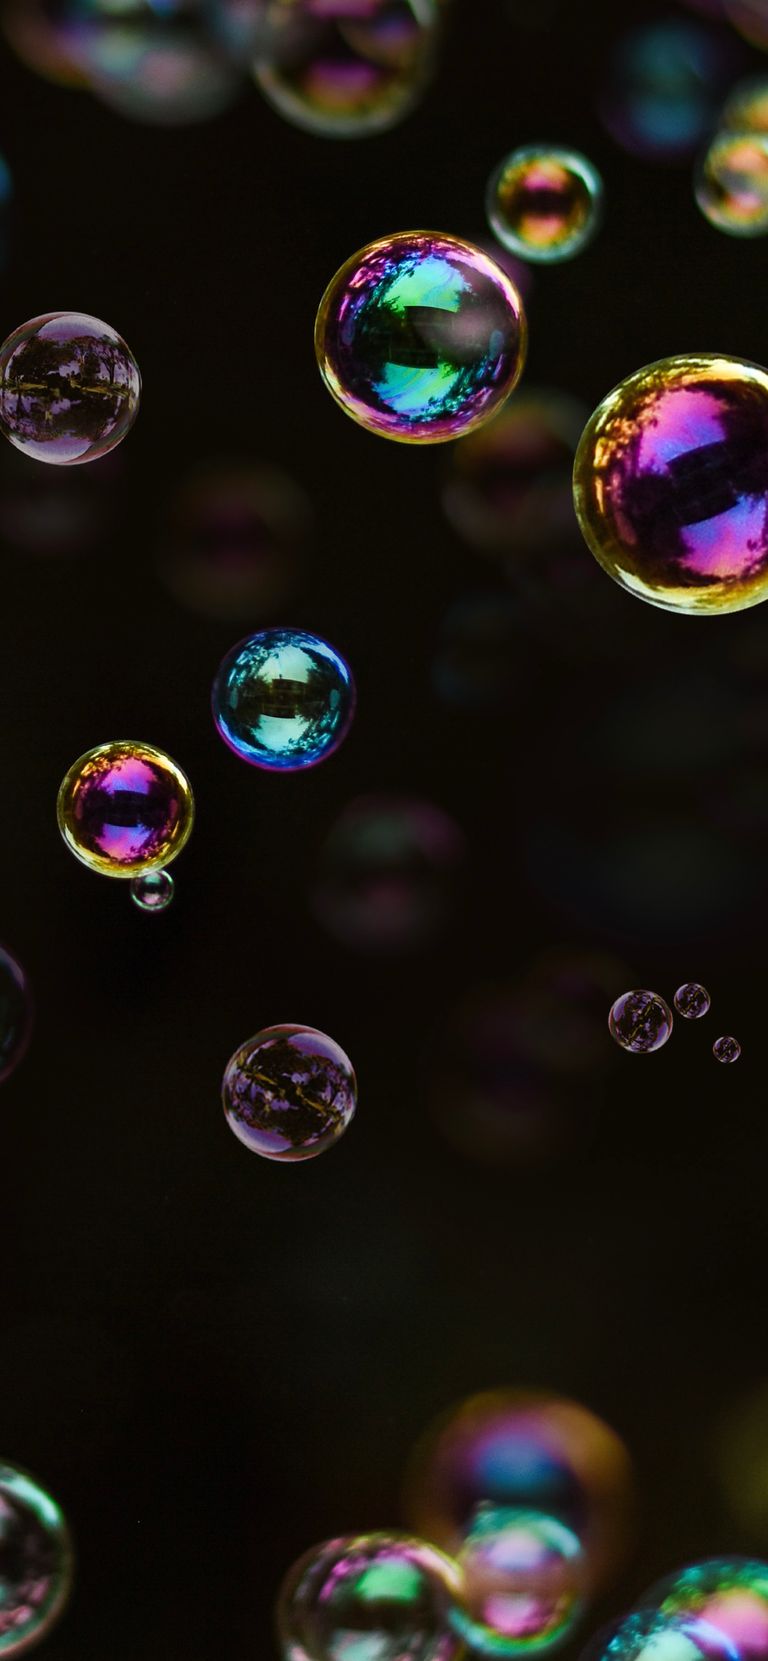 The Science of Bubbles